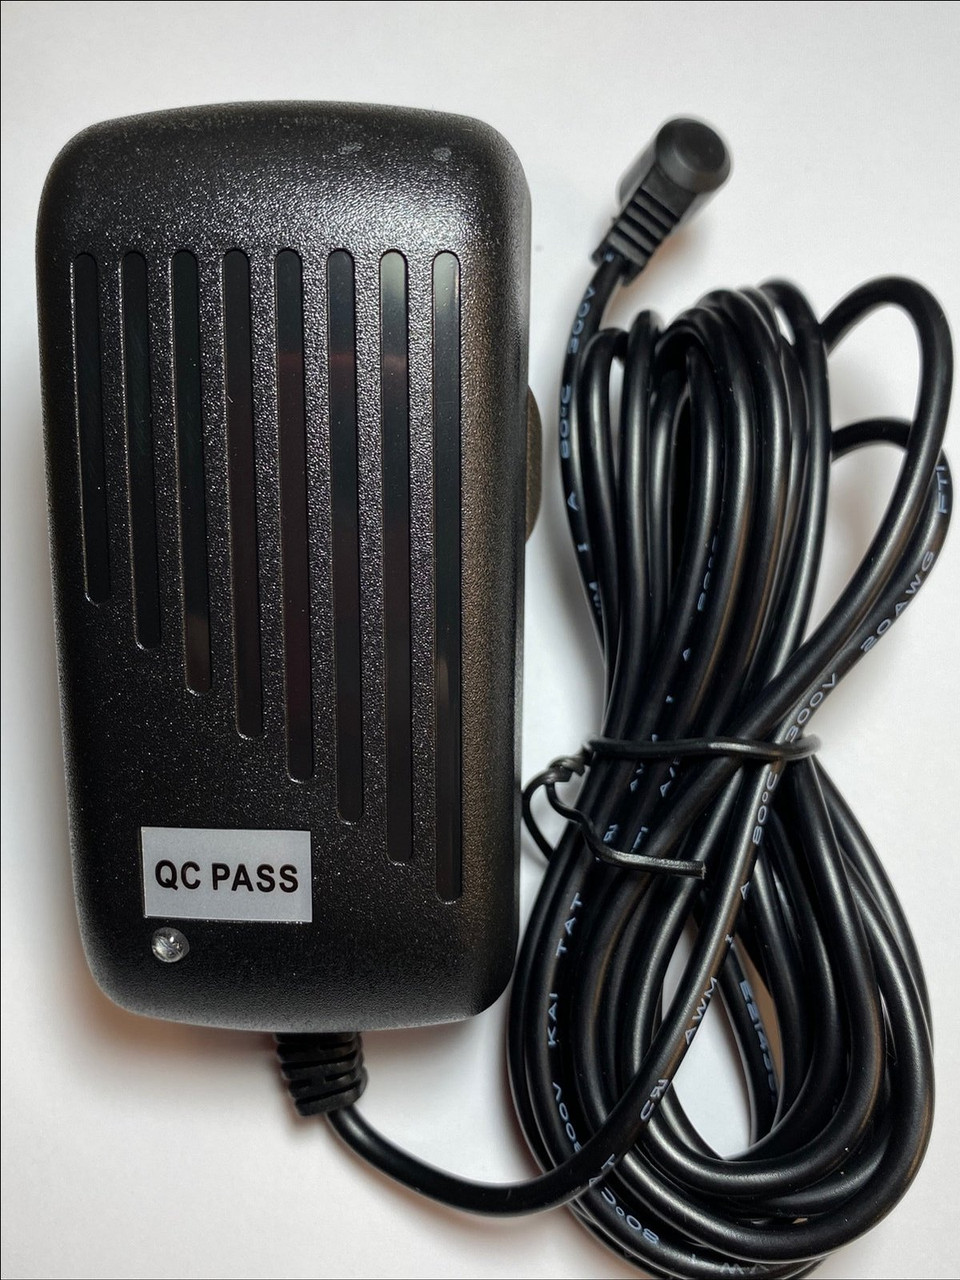 Zoostorm Freedom 3310-9310 Netbook Laptop 12V 3A Mains AC Power Adaptor Charger